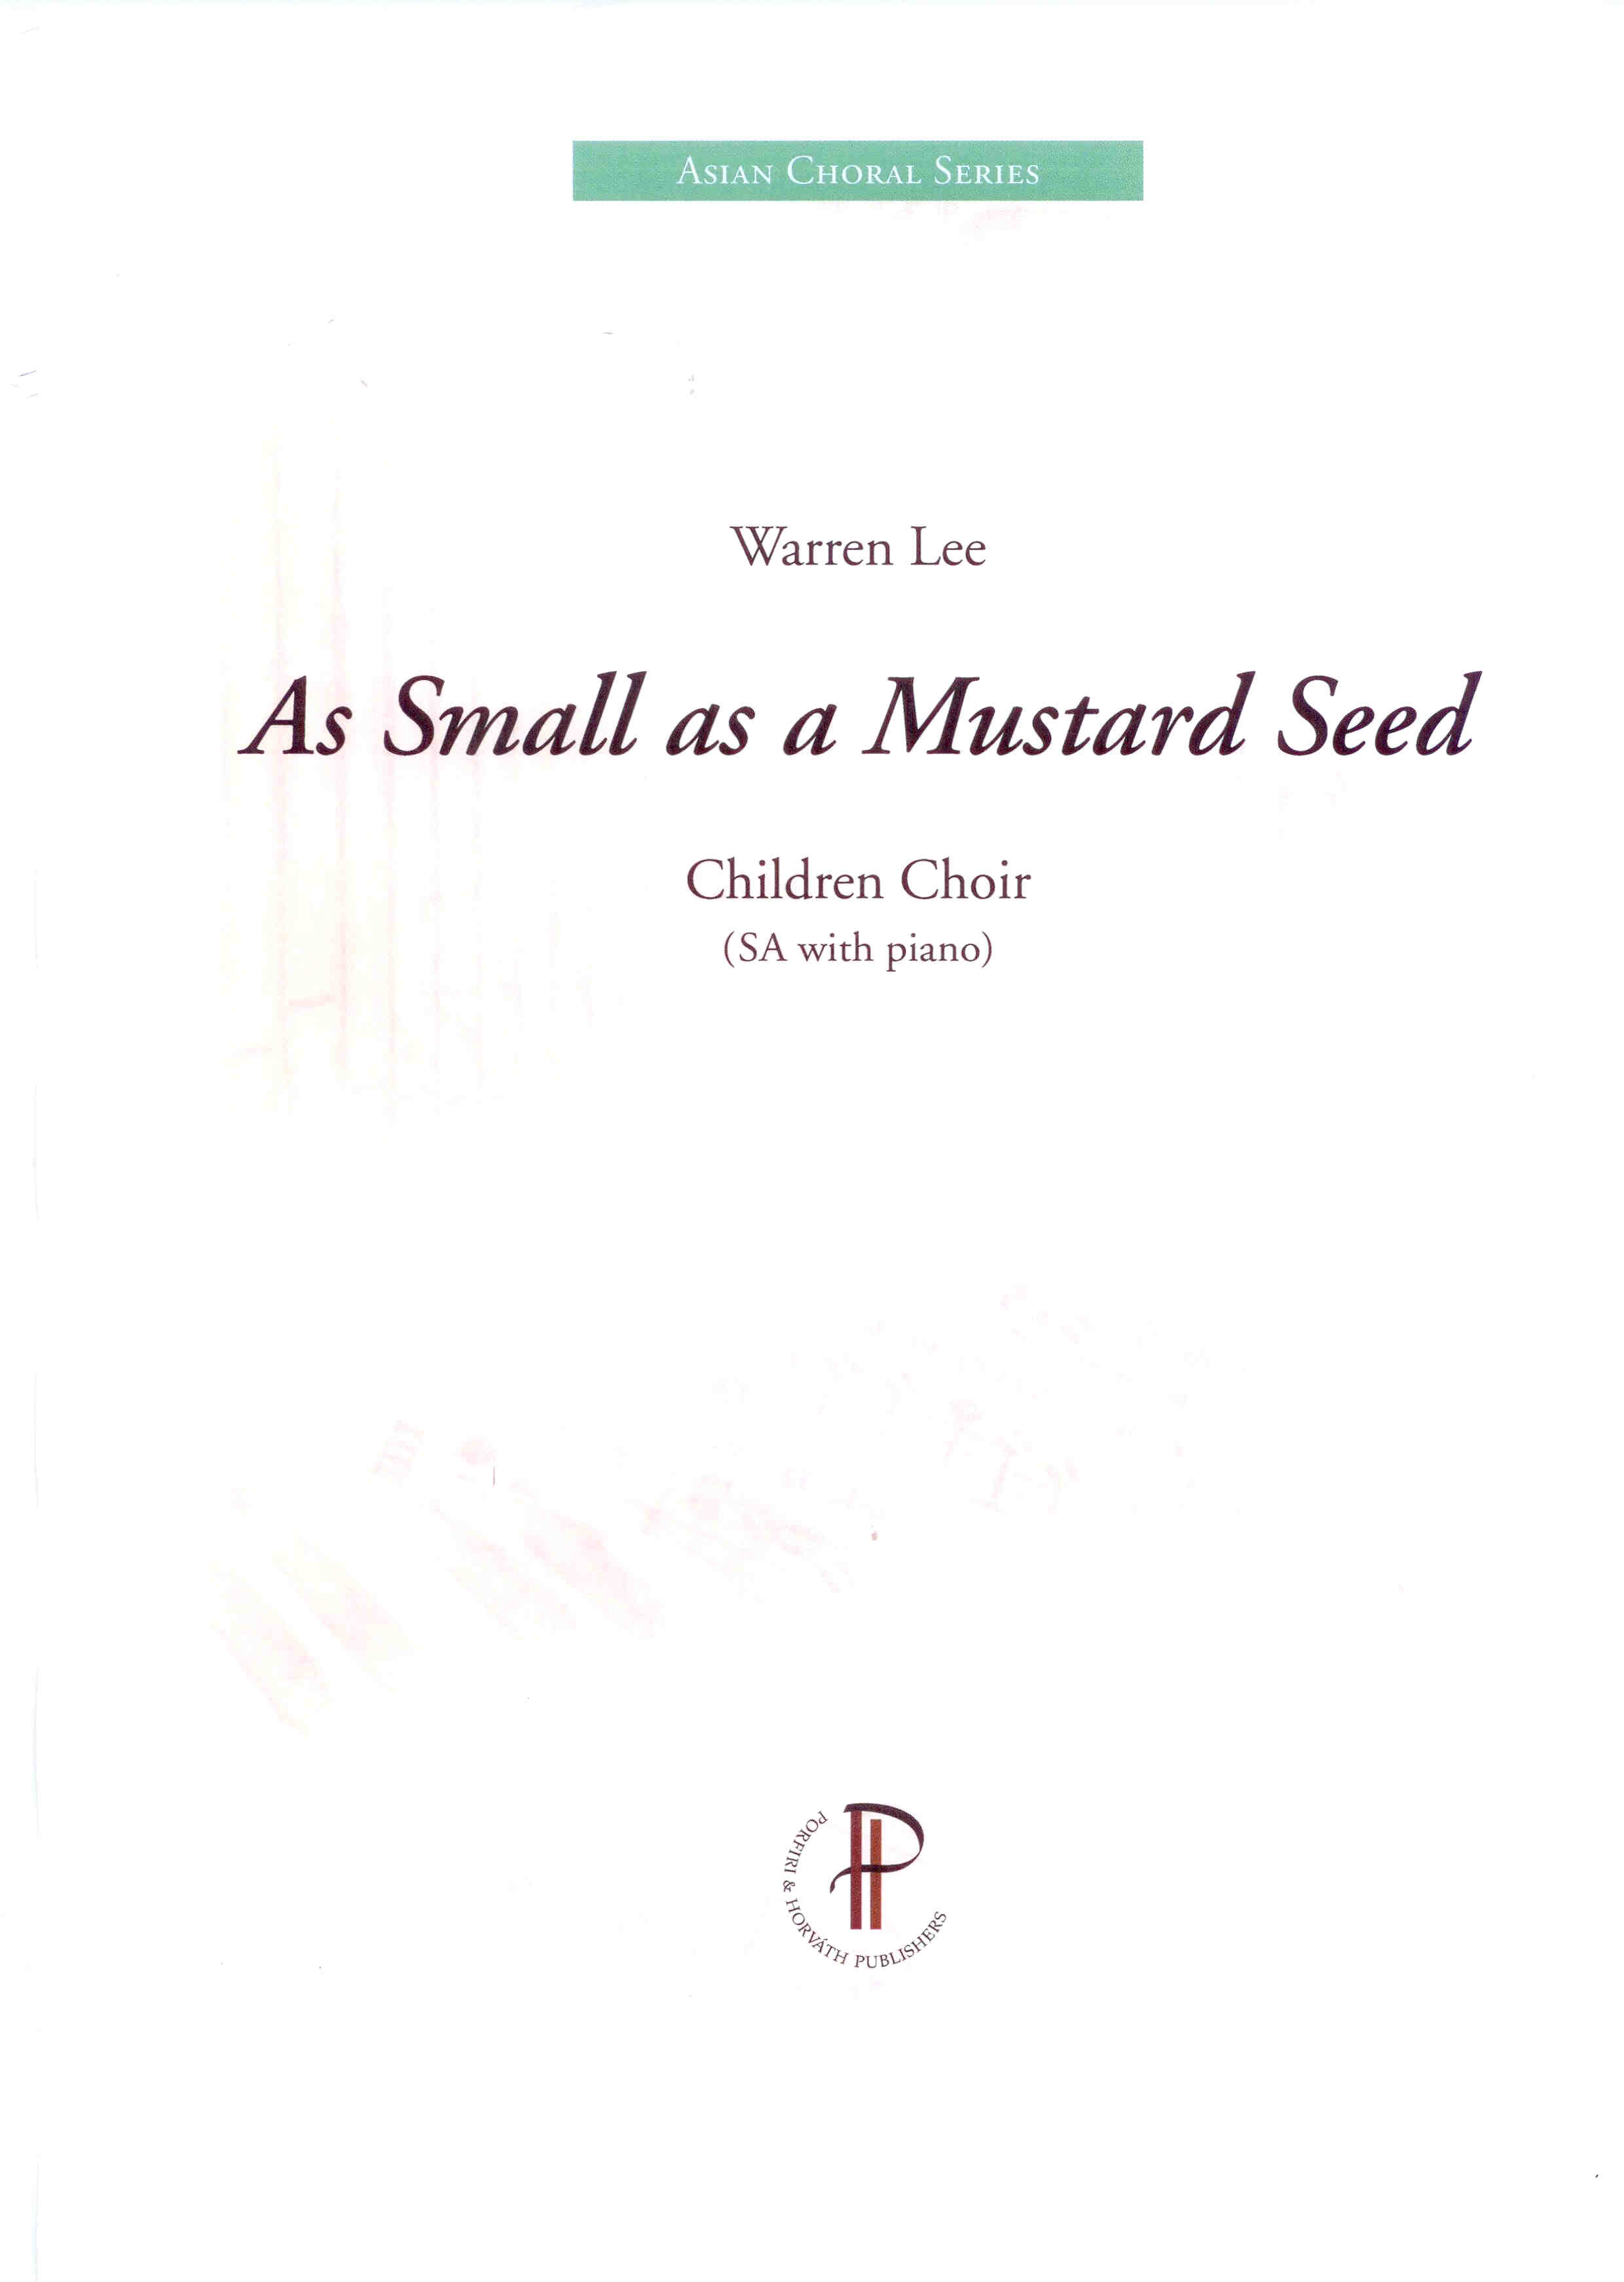 As small as a Mustard Seed